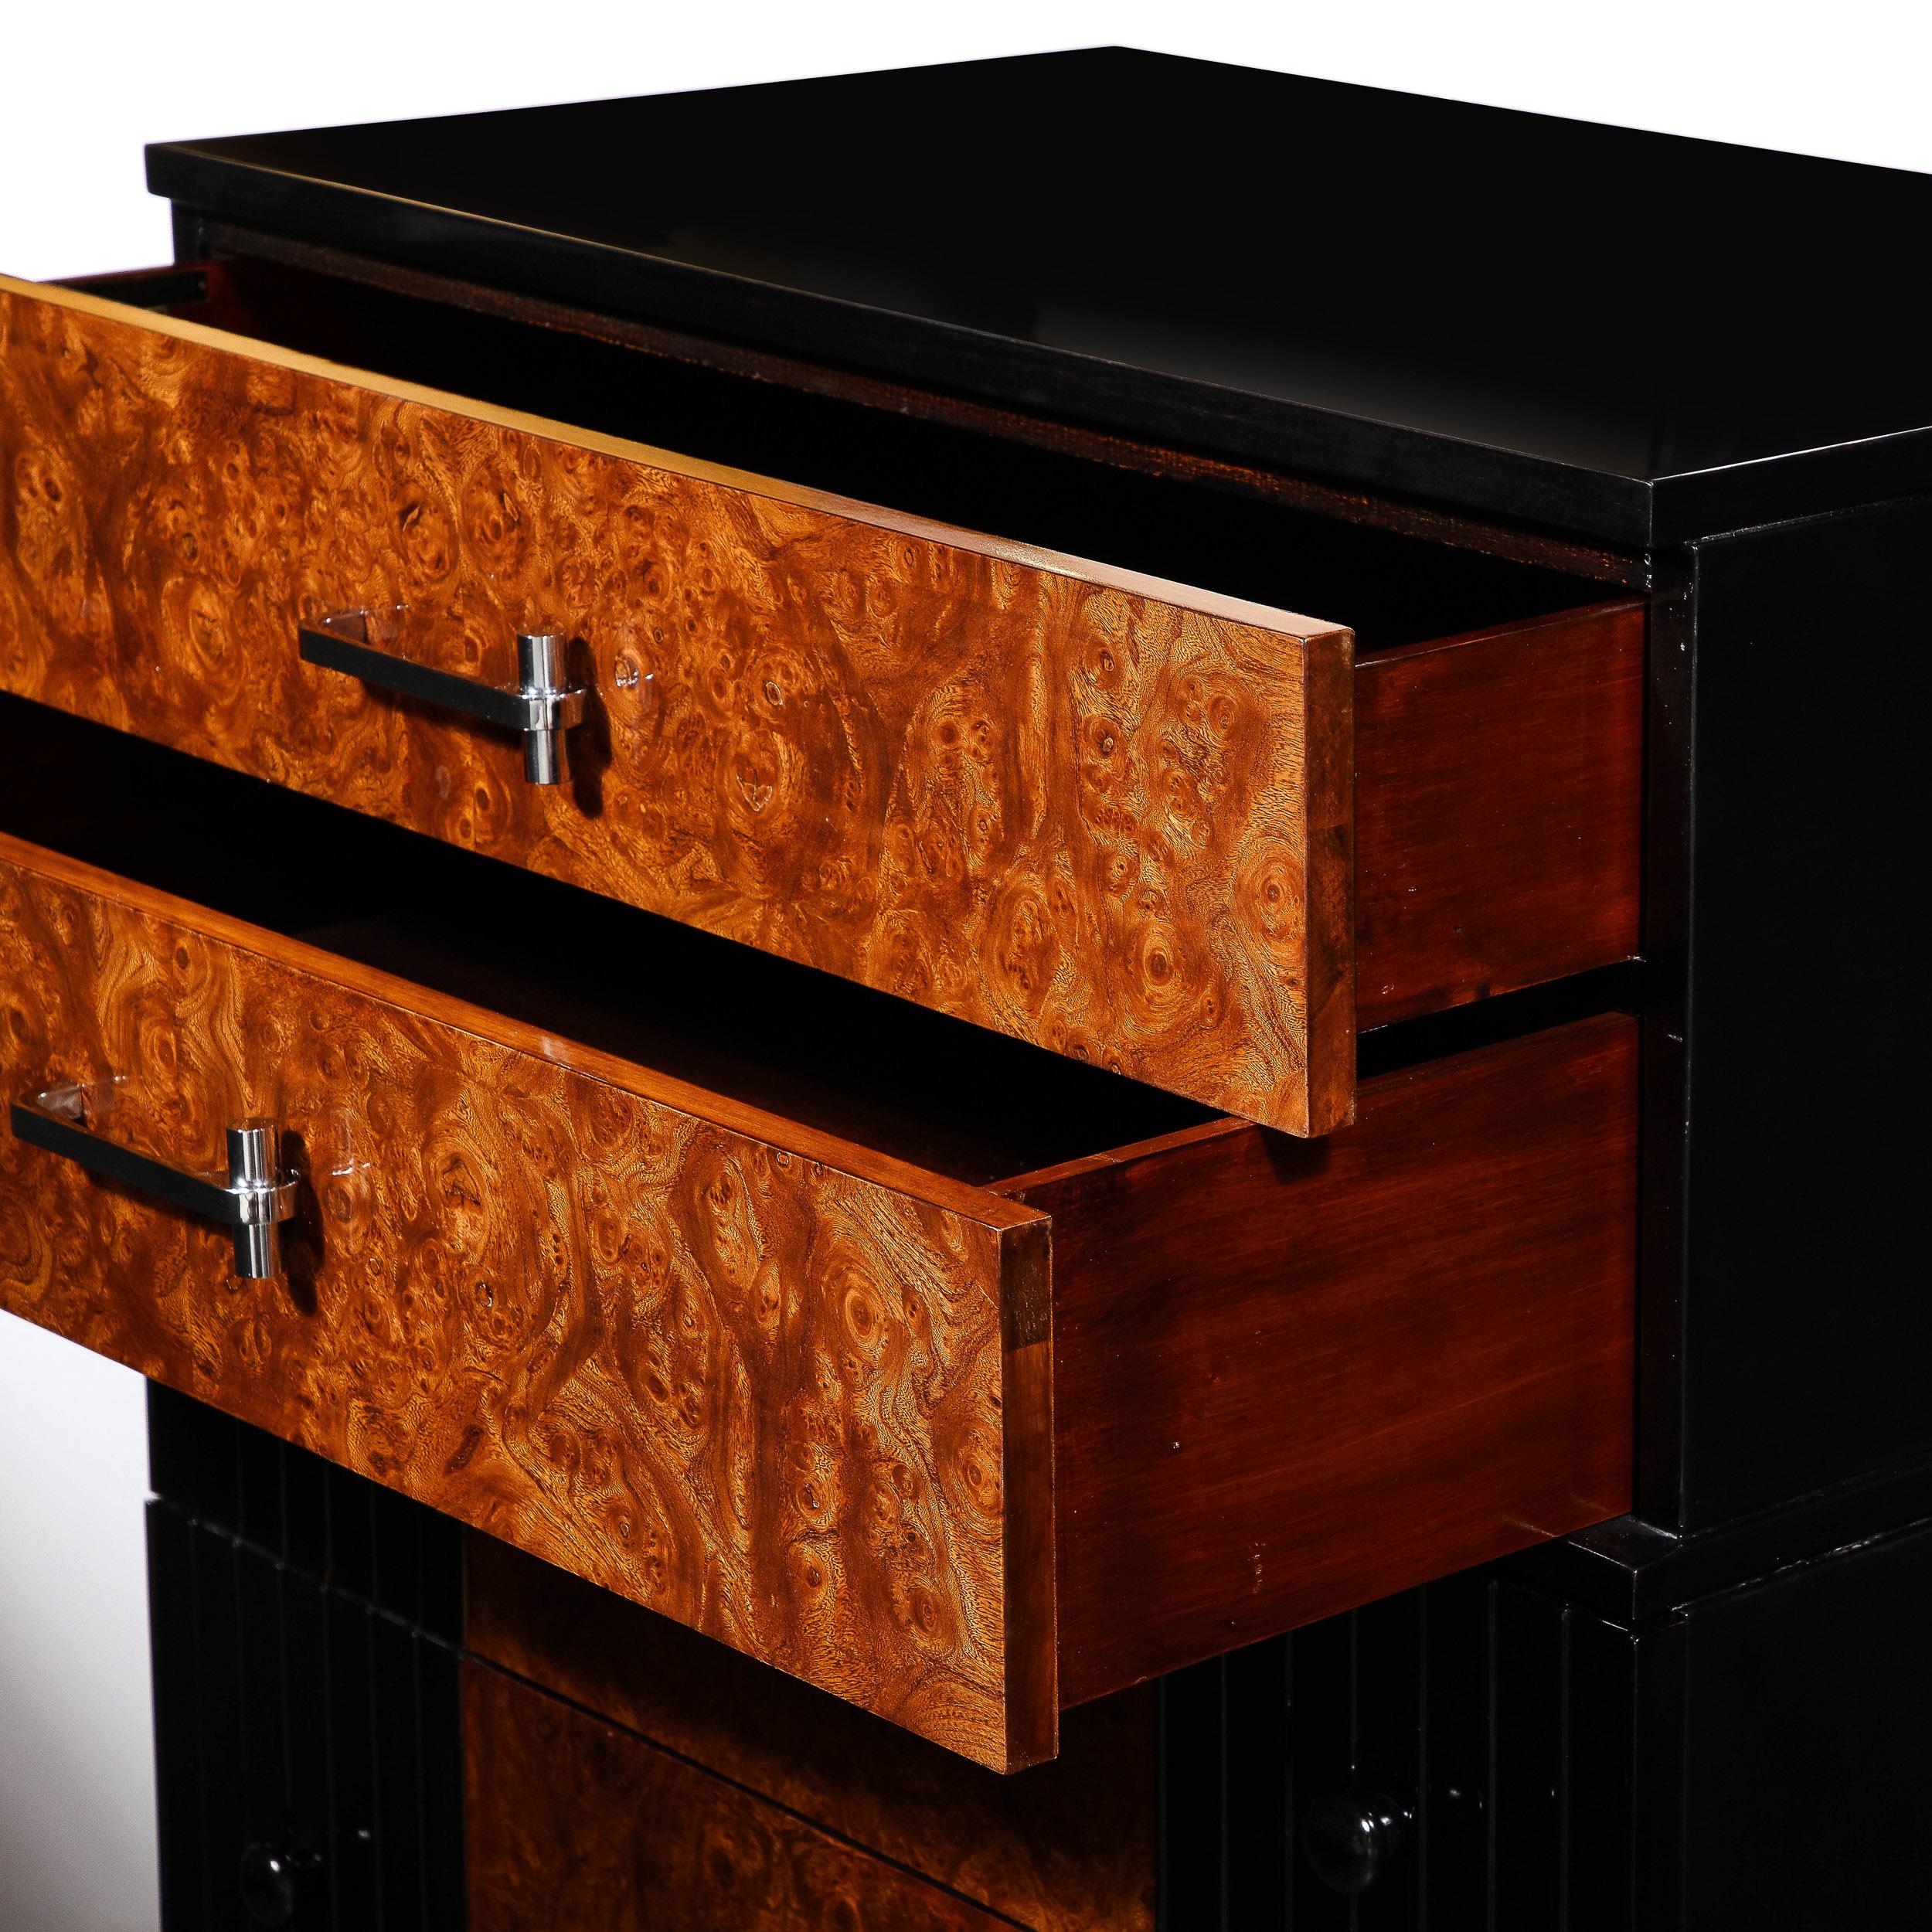 Mid-20th Century Art Deco Book-Matched & Burled Walnut, Chrome Pulls & Fluted Black Lacquer Chest For Sale